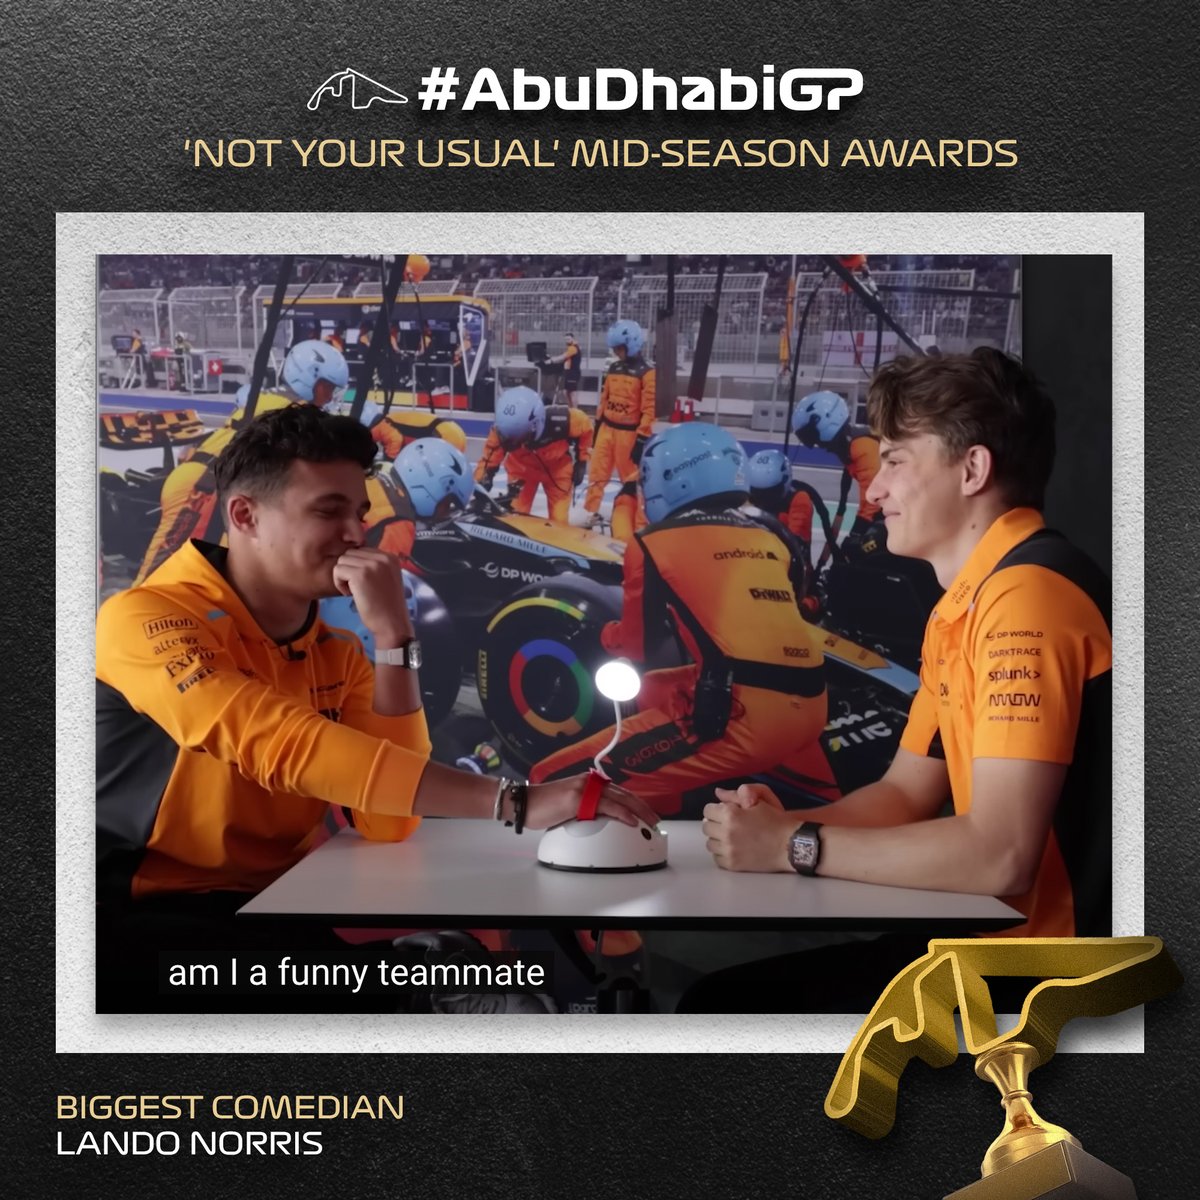 Award for The Biggest Comedian so far this season has to go to the one and only Last Lap @landonorris! 😂🏆

#AbuDhabiGP #MidSeasonAwards #F1 #Formula1 @f1